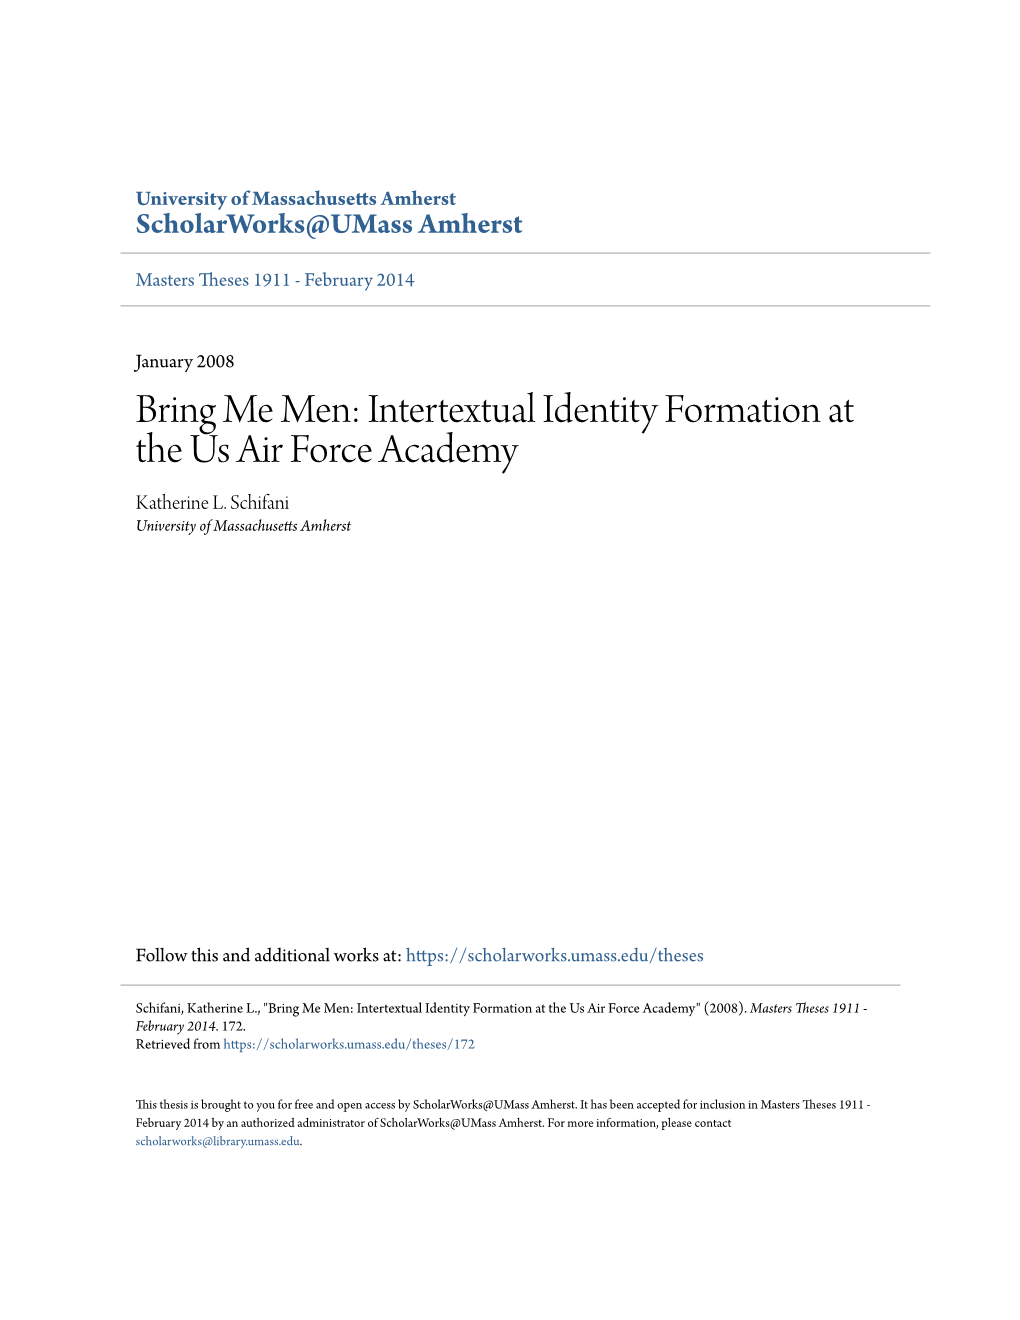 Bring Me Men: Intertextual Identity Formation at the Us Air Force Academy Katherine L